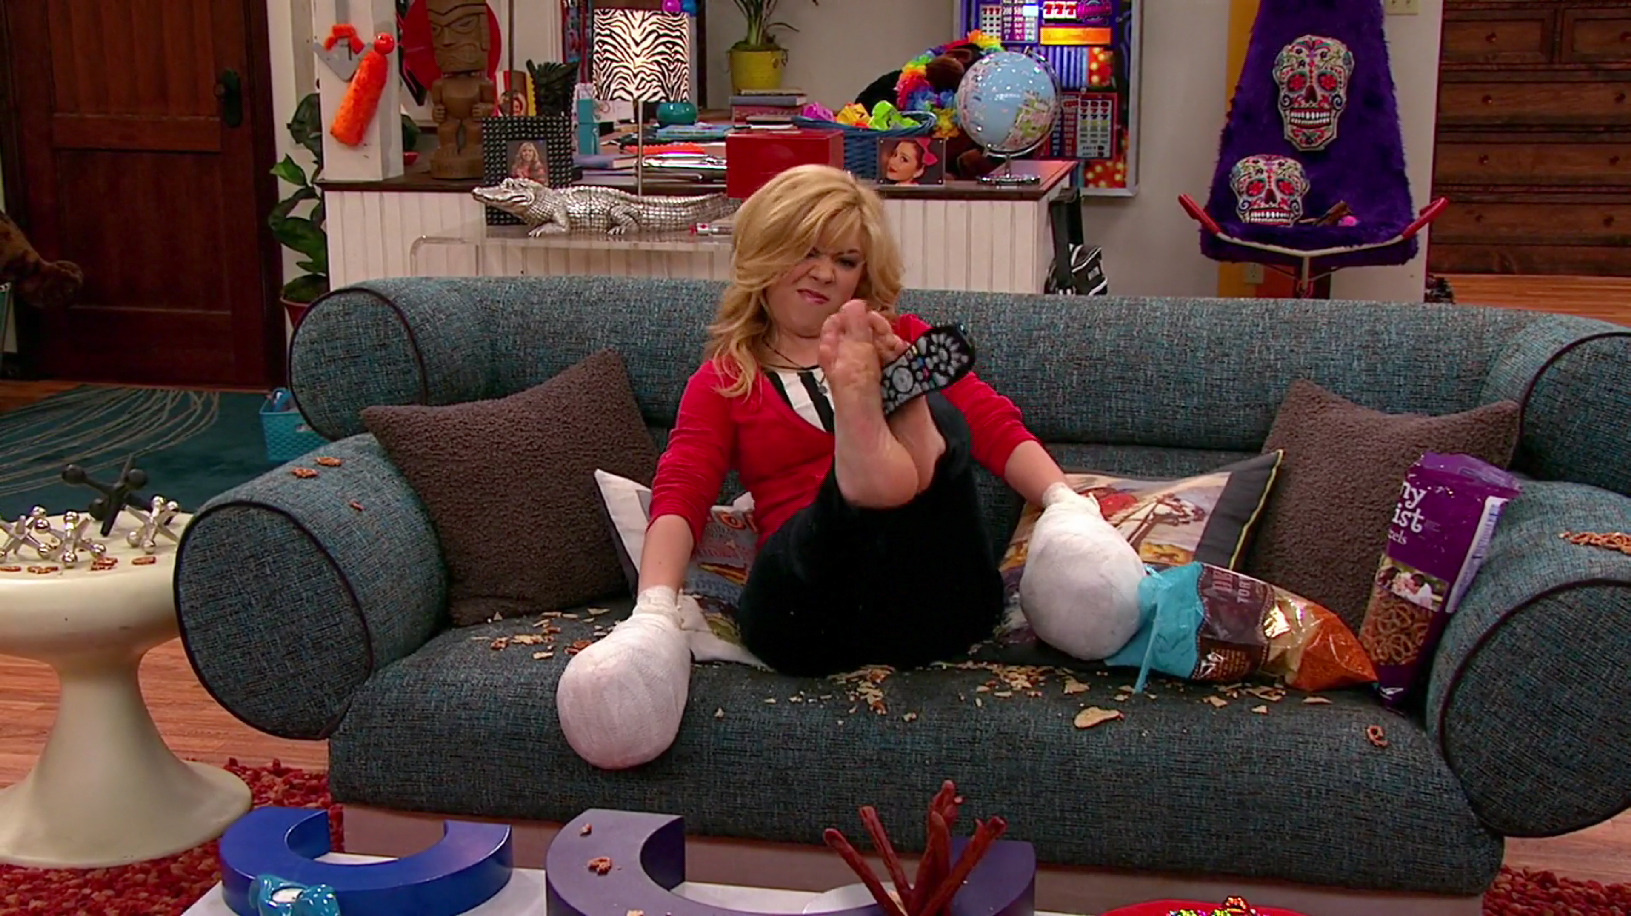 Feet 1238267 for fans of iCarly. litrato of Jennette McCurdy Feet 1238267 f...